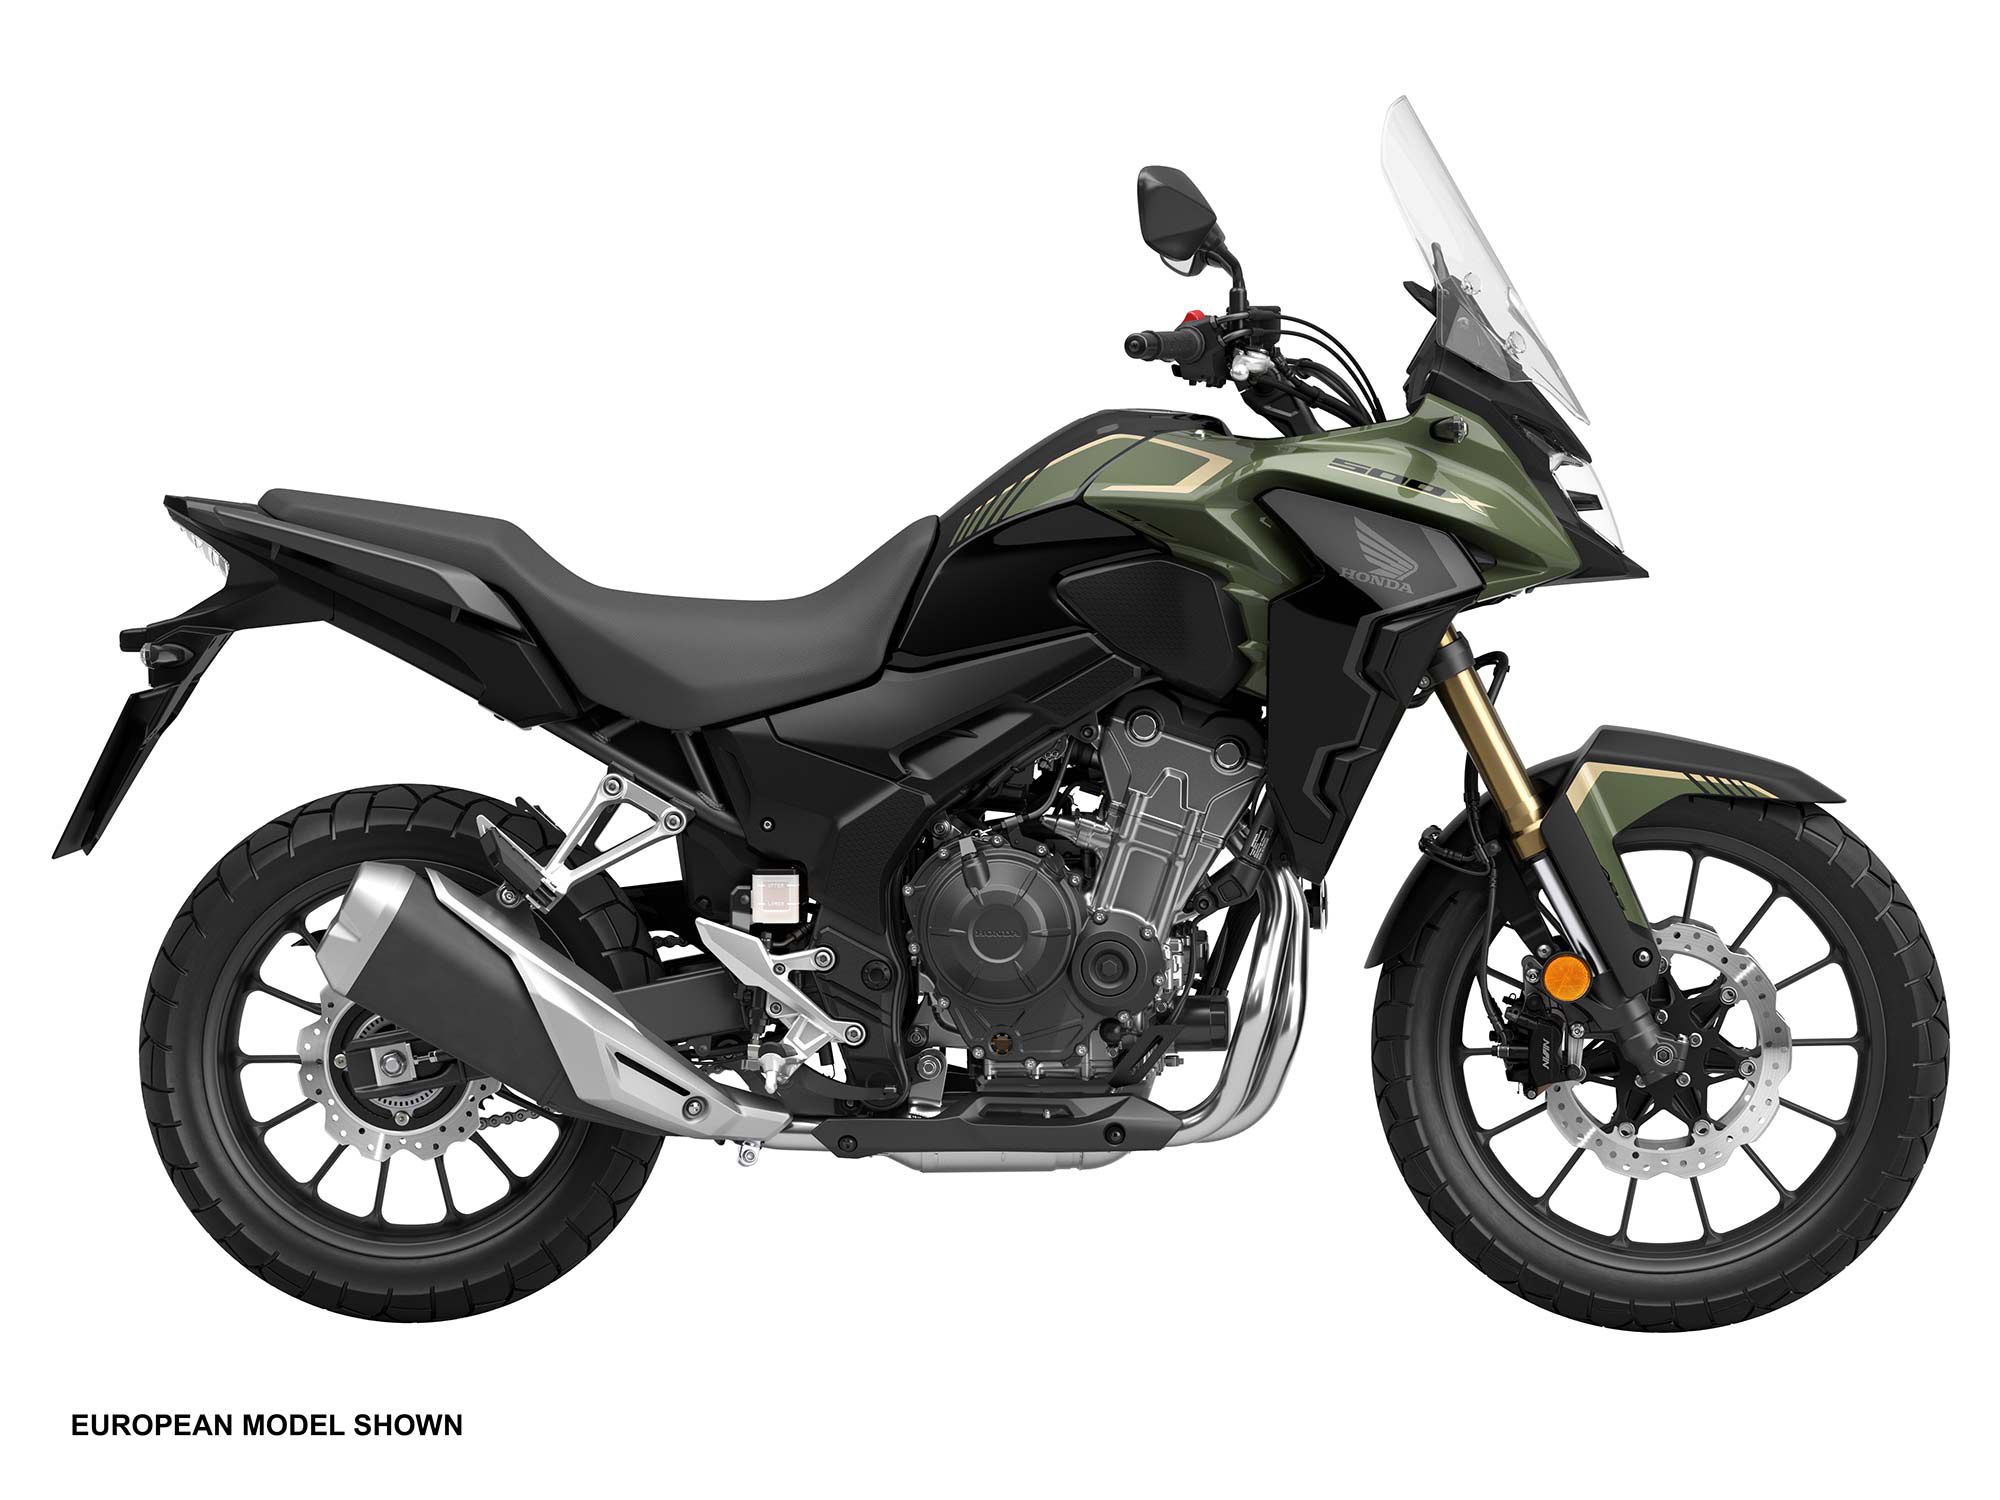 For 2022, Honda upgraded the CB500X’s fork, braking system, and made a handful of chassis-related improvements, including new wheels and a redesigned swingarm.